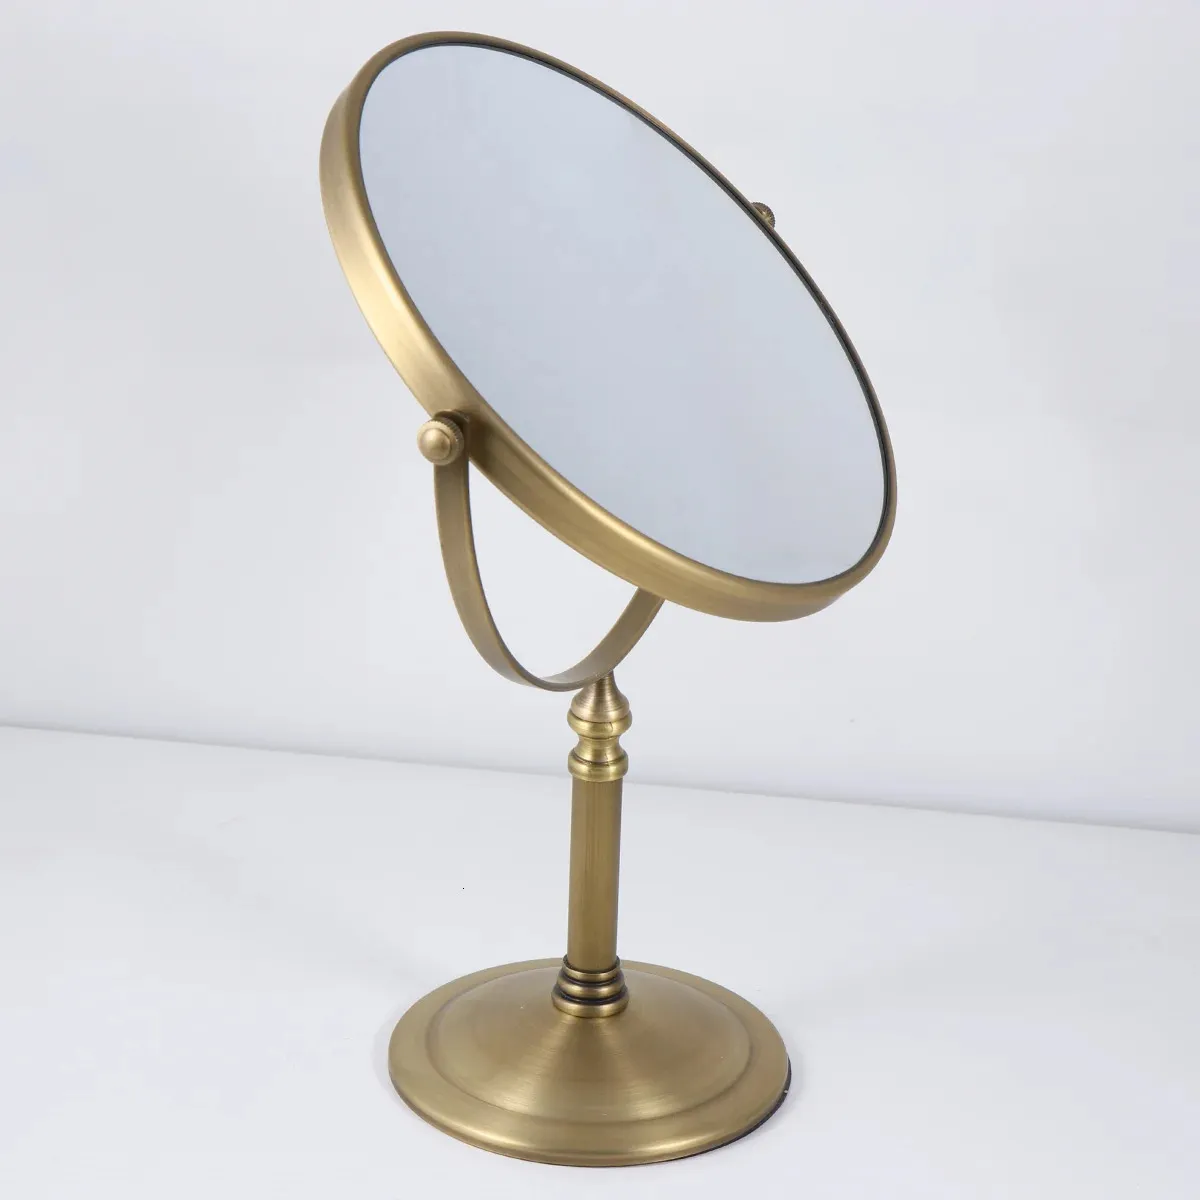 Mirror Vanity Magnifying Side Golden Table Double Magnification 3X Stand Swivel Home Two Bathroom Shaving Beauty Vintage 231221